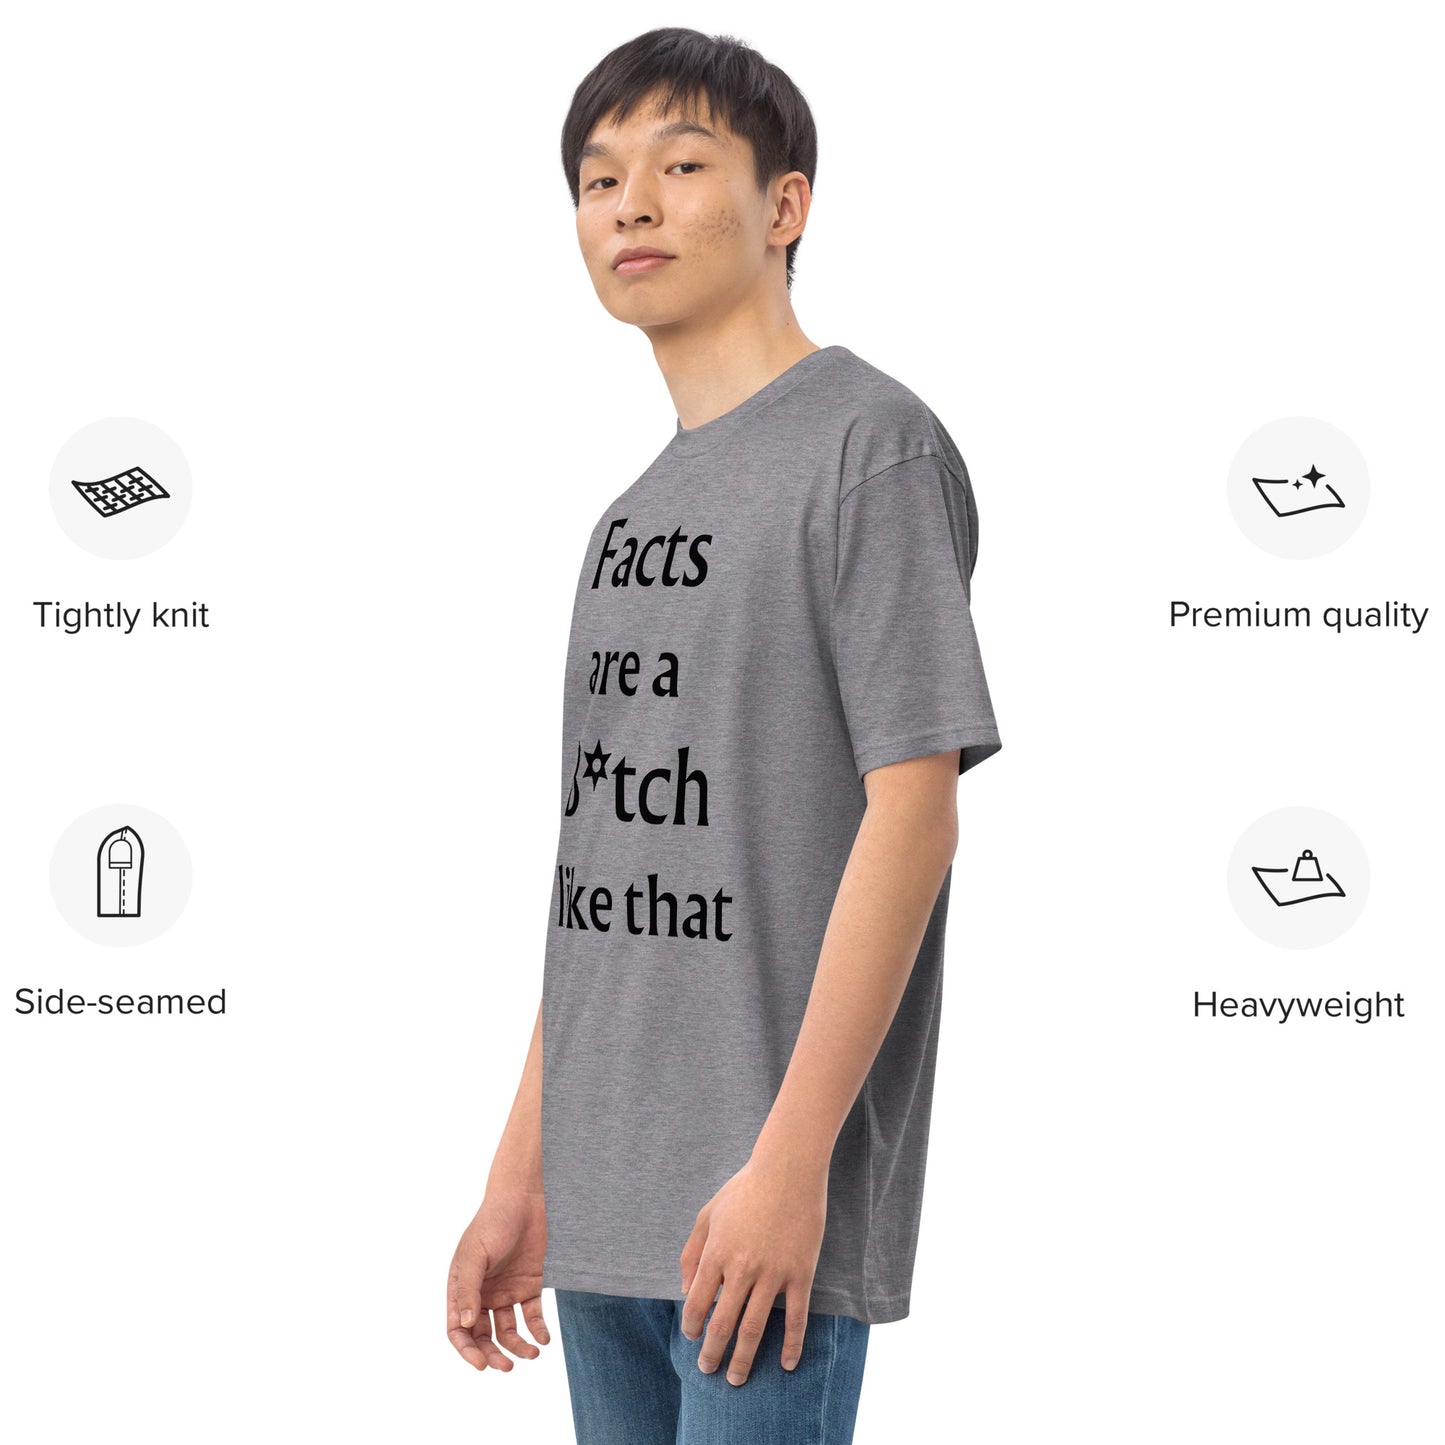 Facts Are A Bitch Men’s premium heavyweight tee